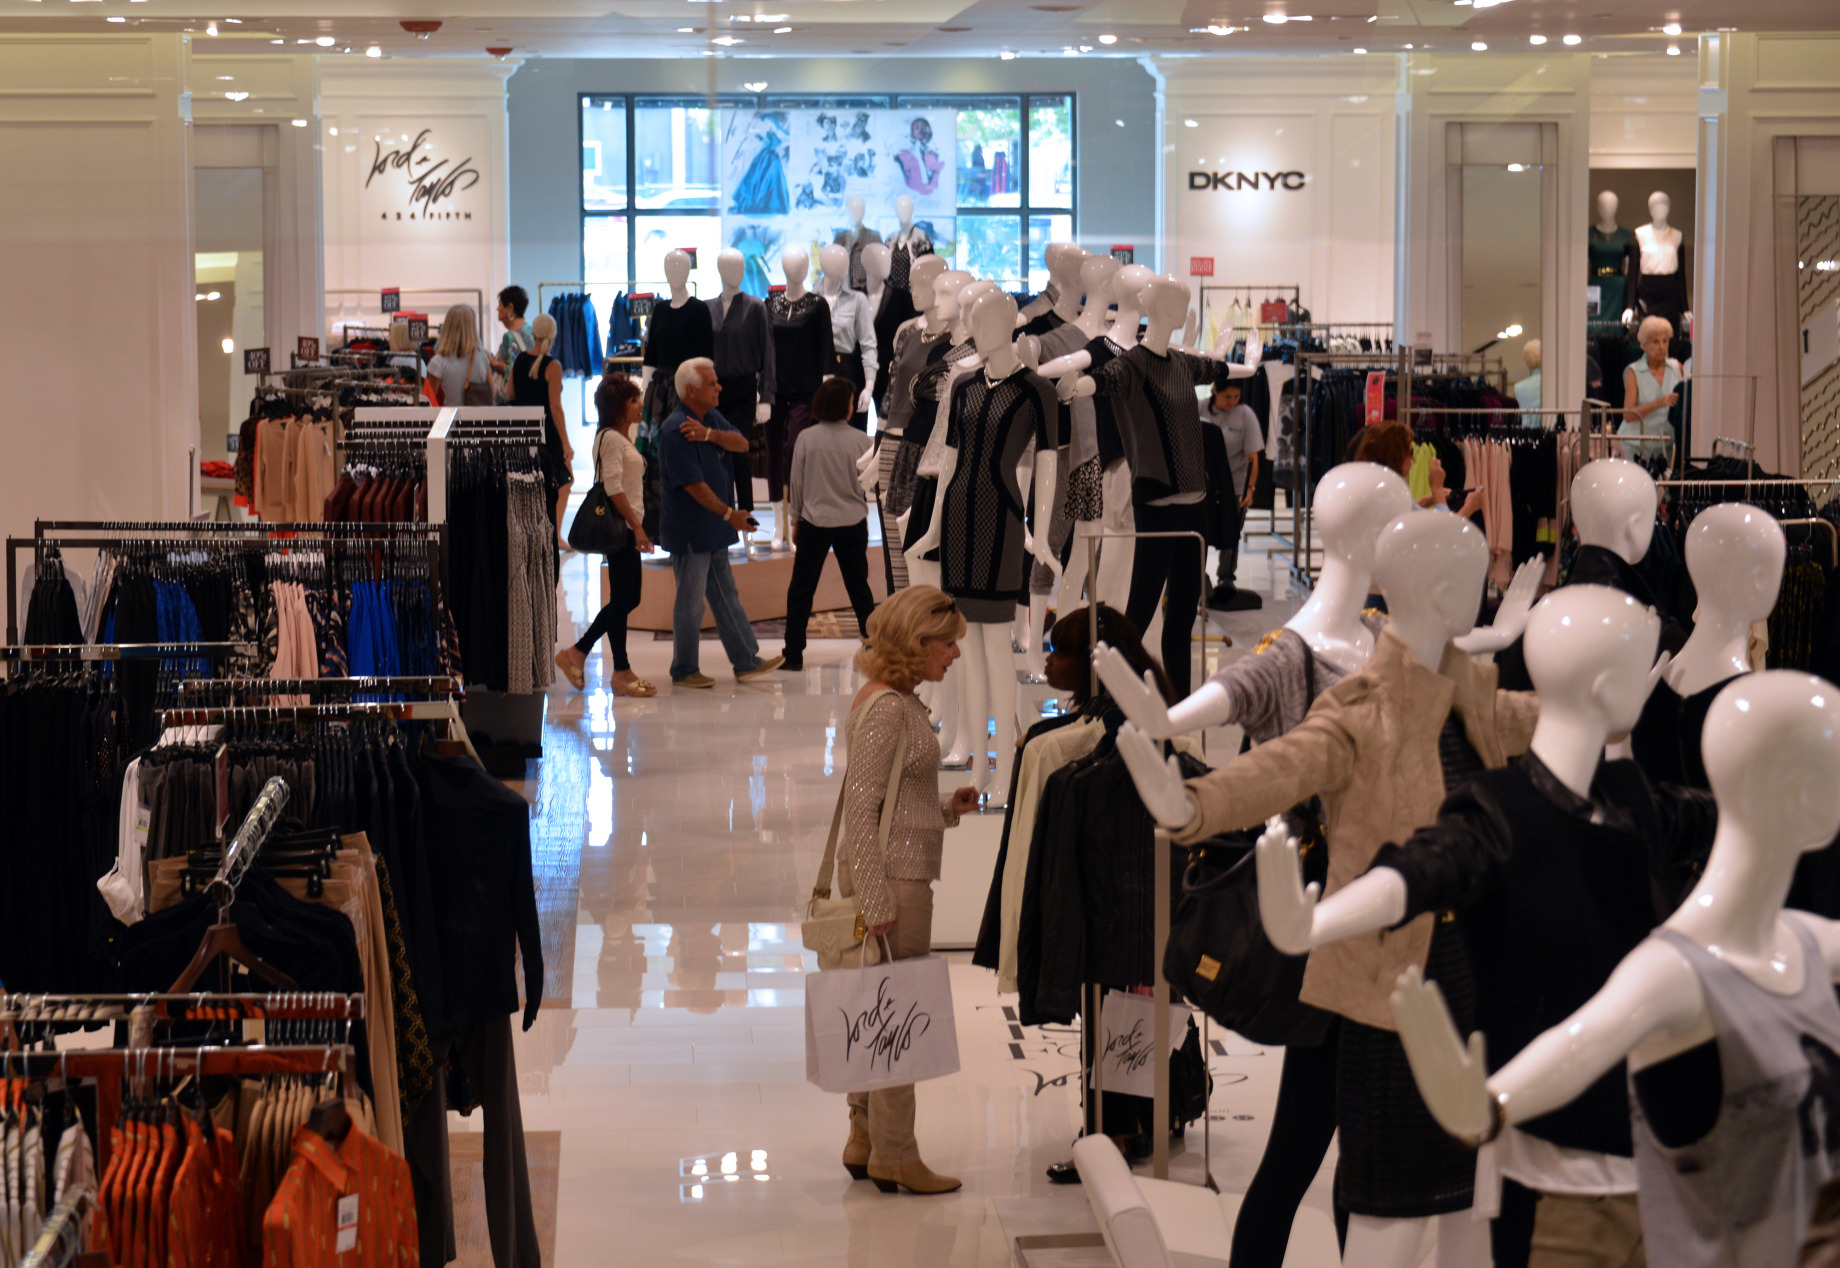 Hudson's Bay to sell Lord + Taylor for $100 million